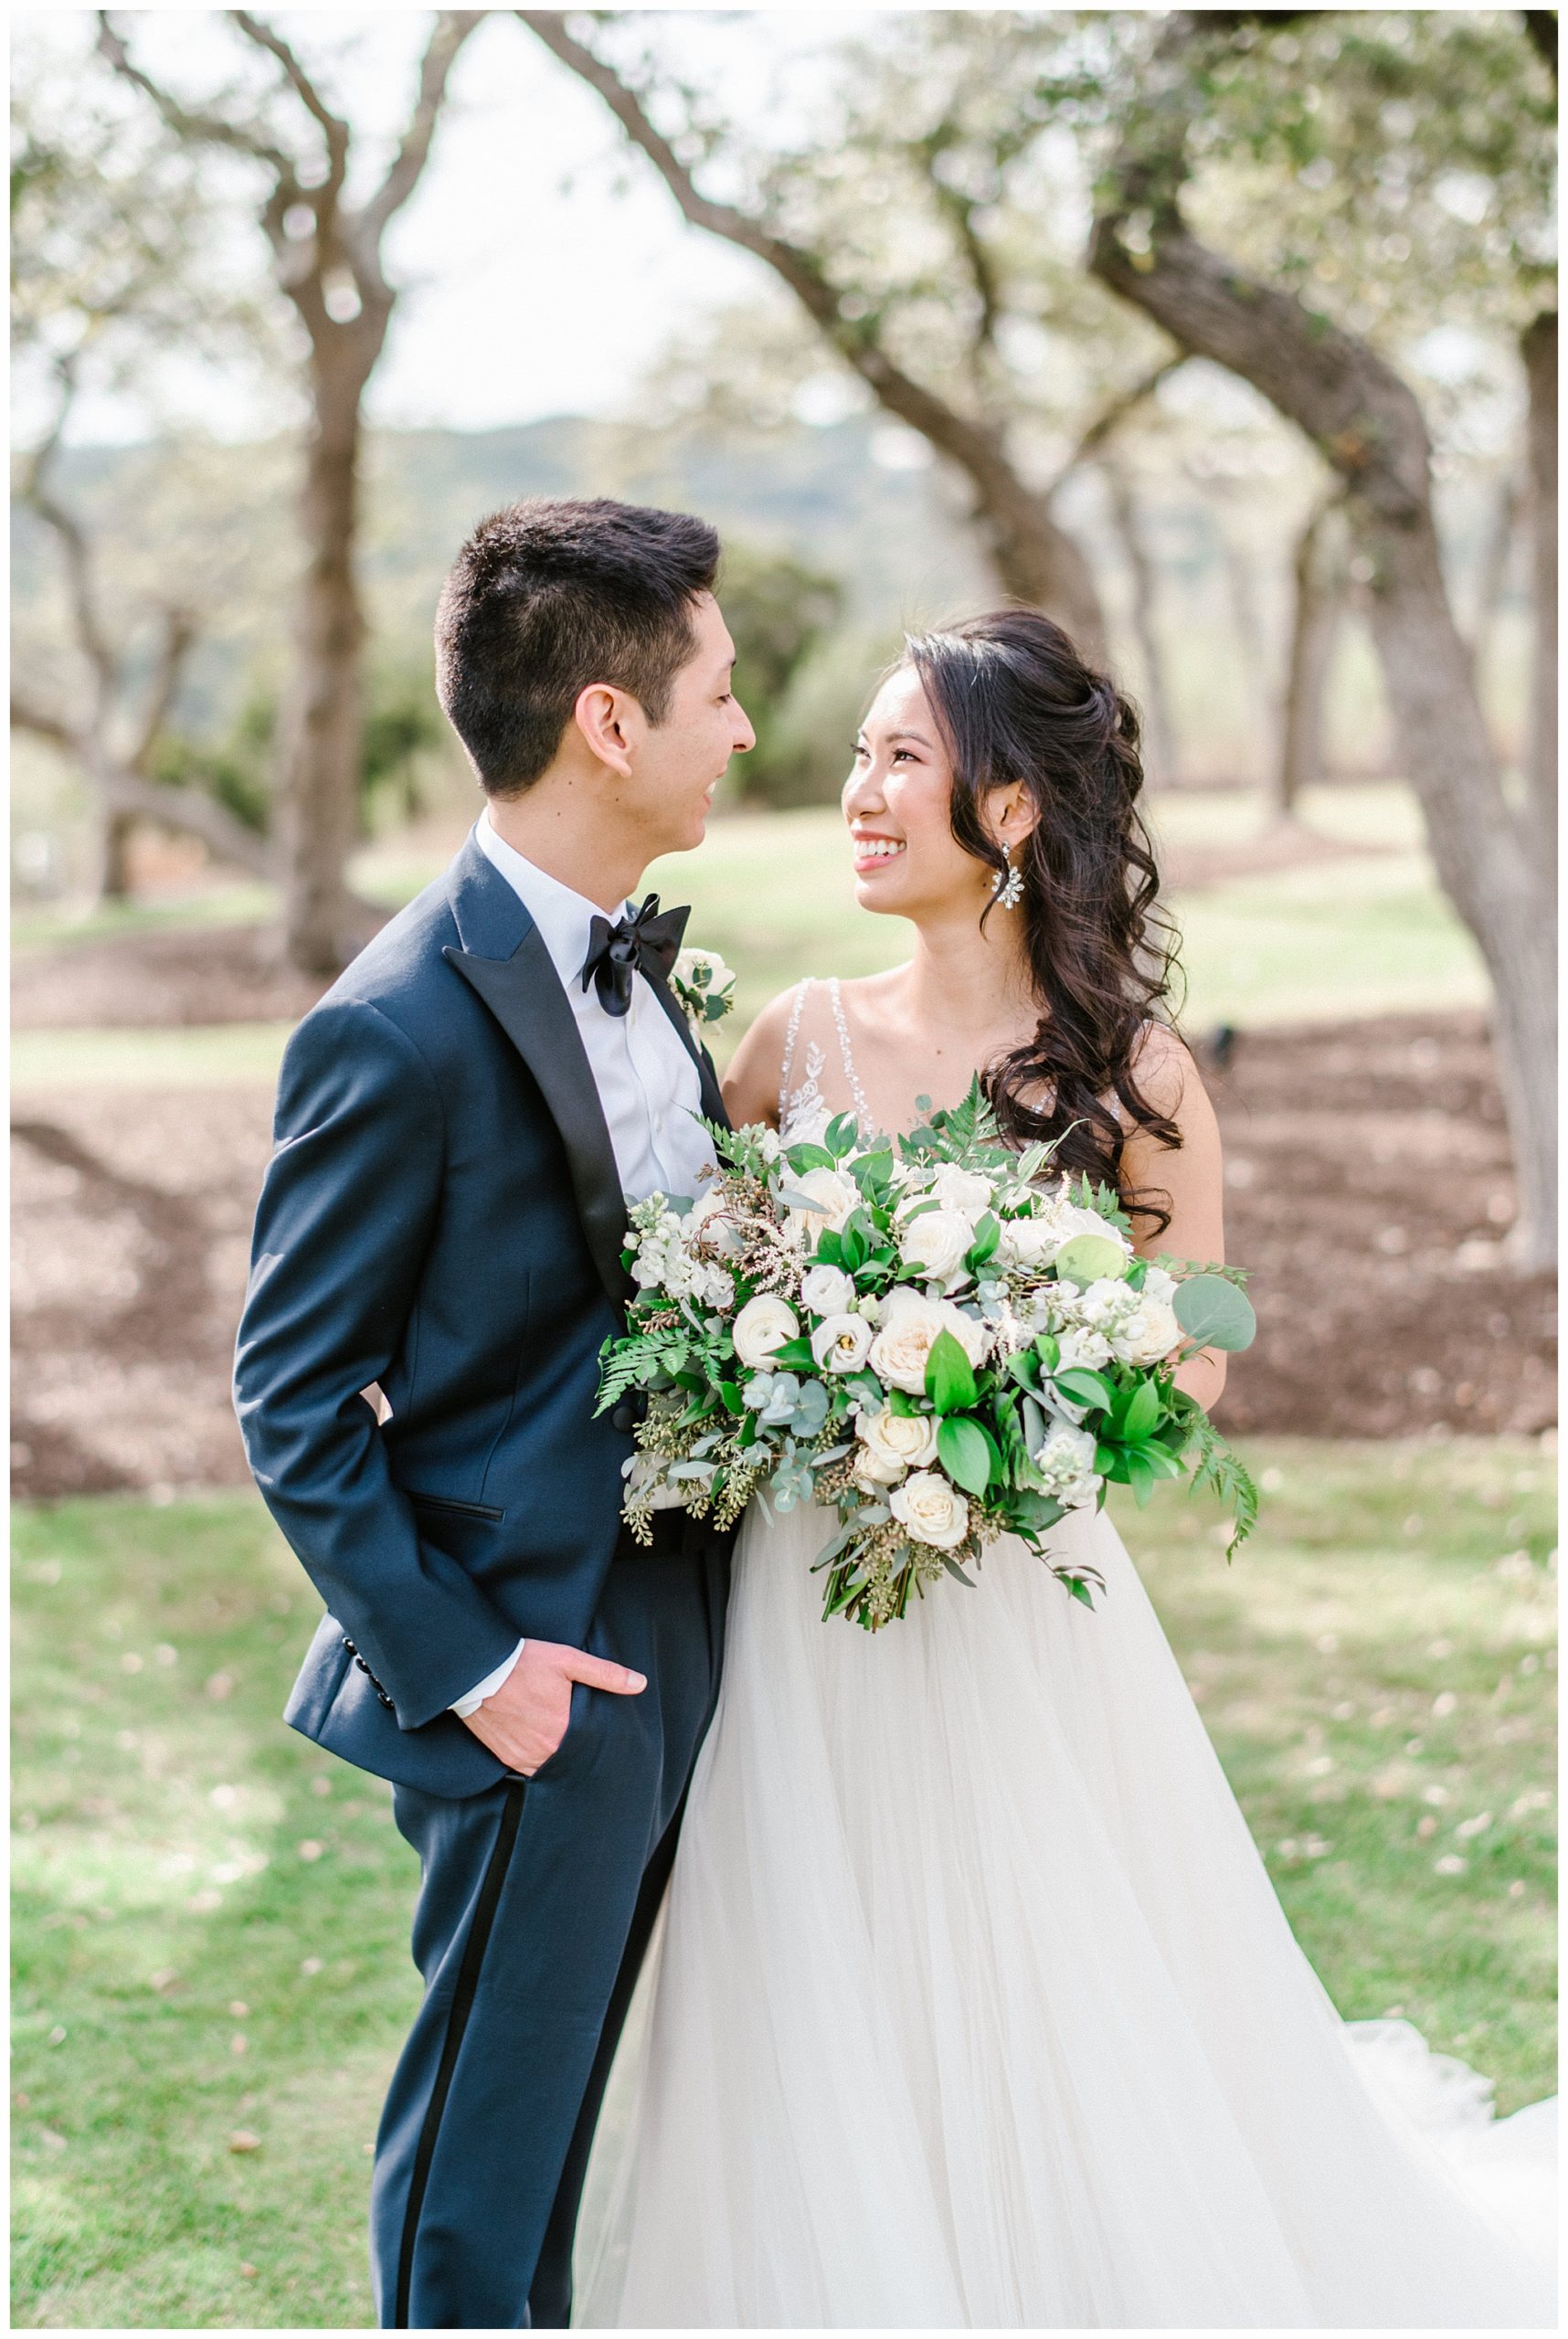 Portrait of Happy Bride and Groom in Texas Hill Country